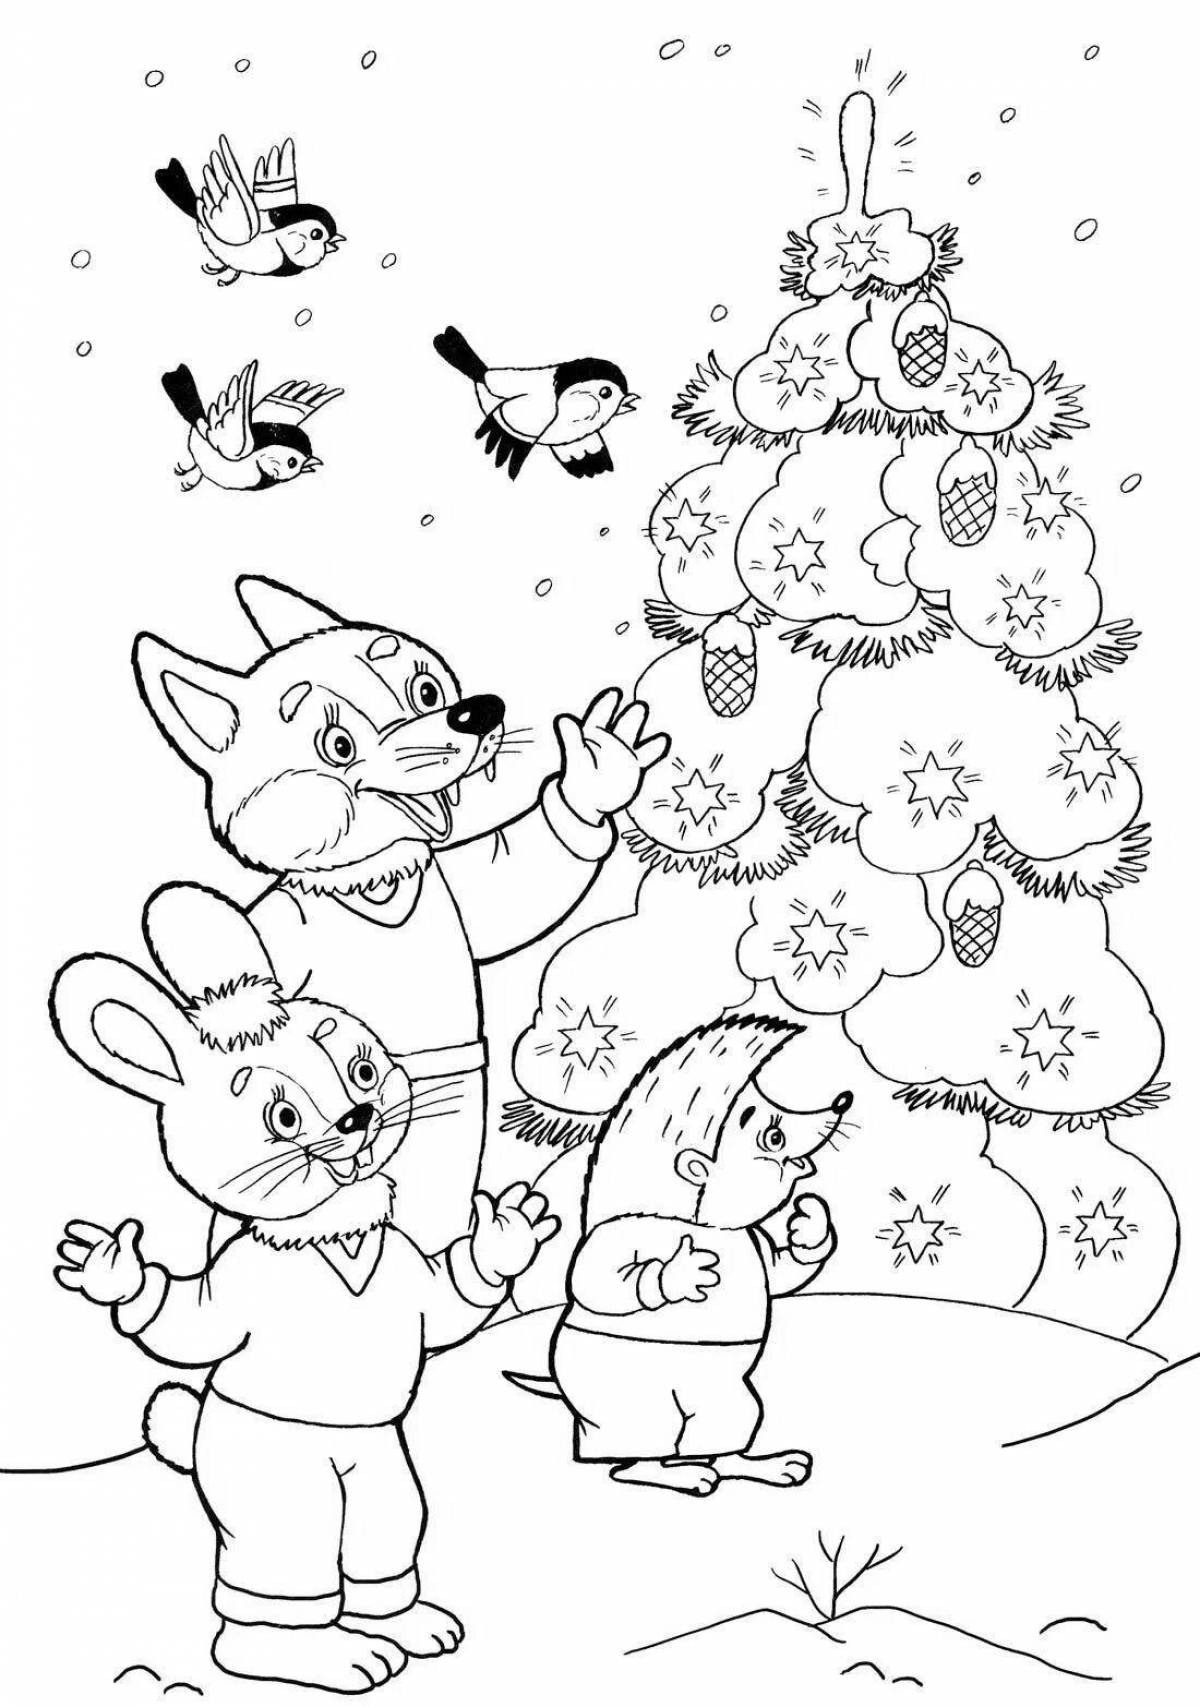 Coloring book heavenly winter forest with animals